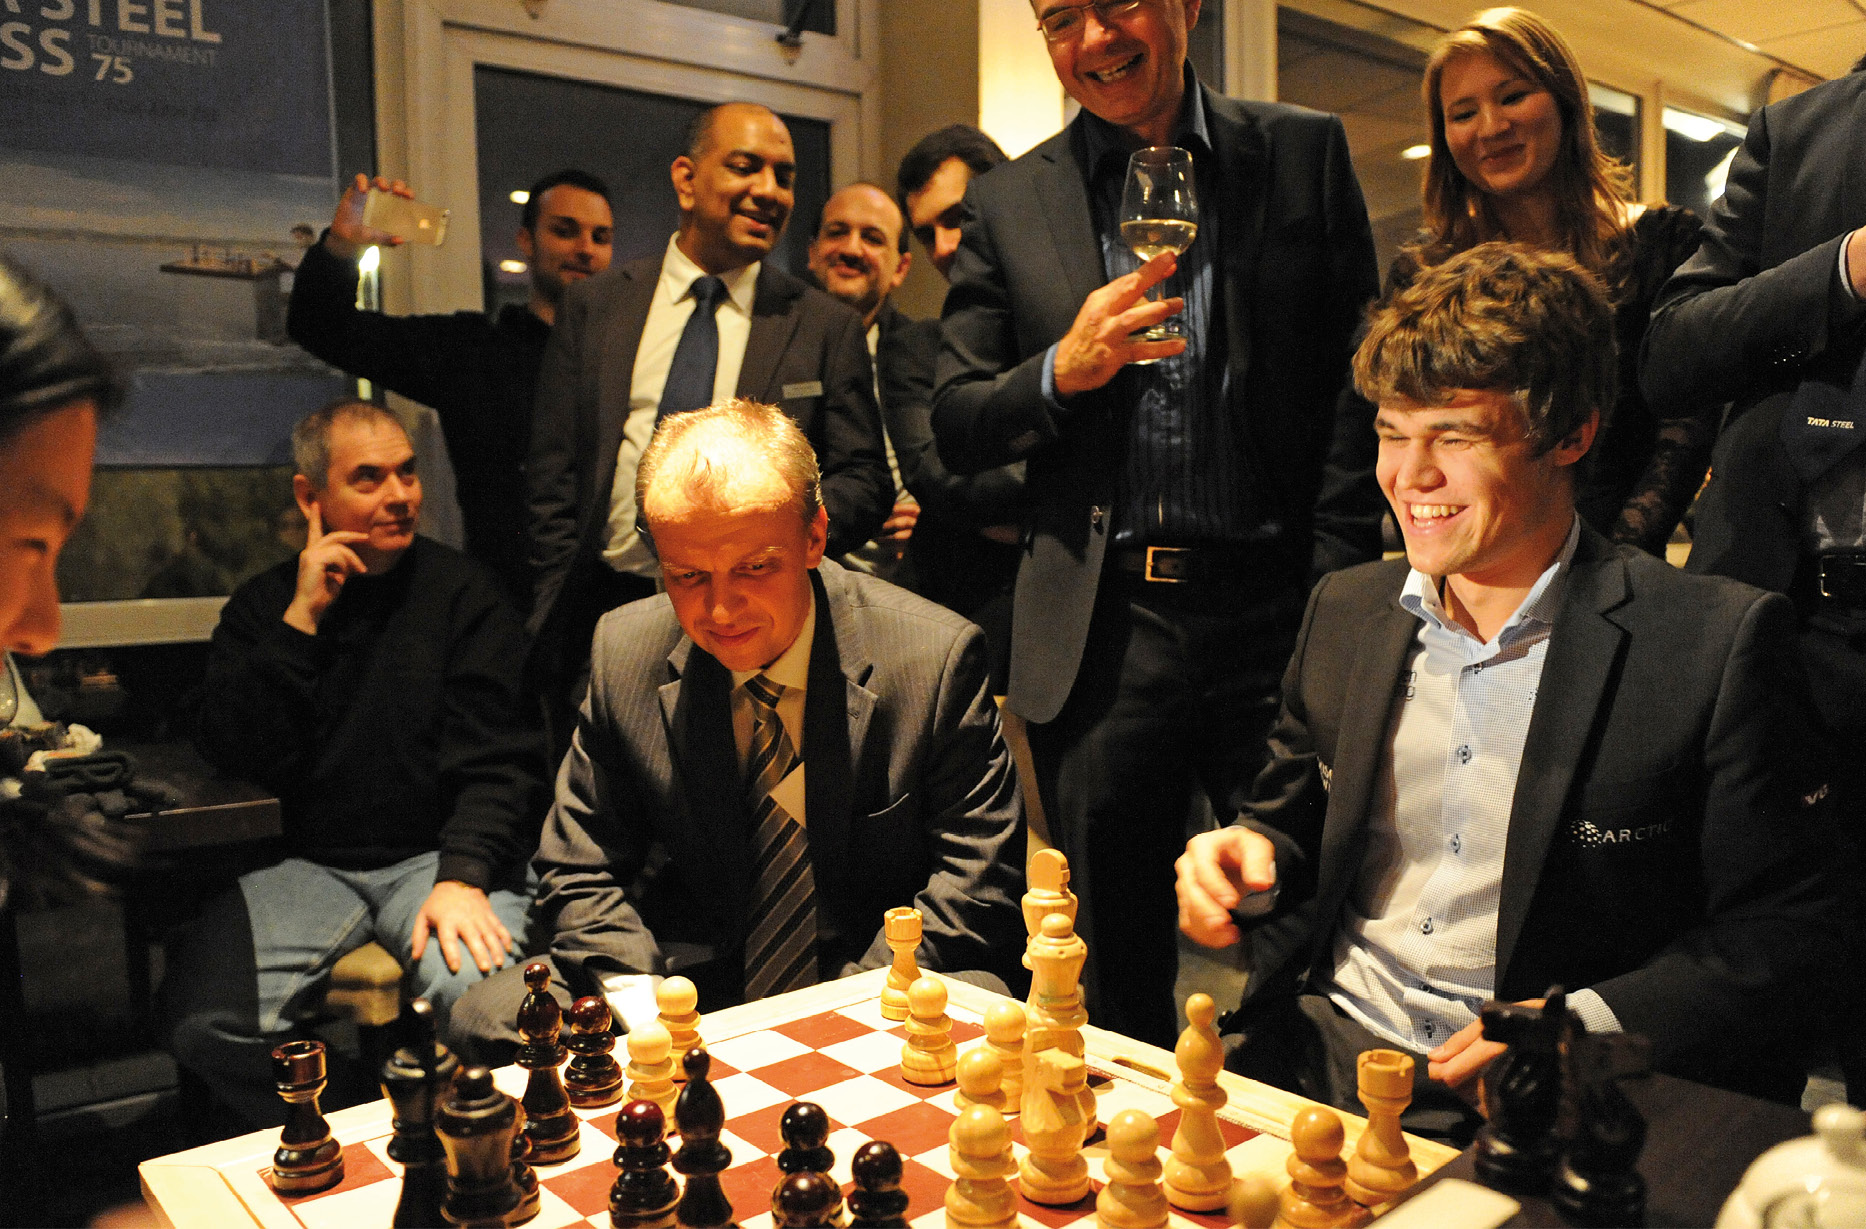 A Day of Masterpieces: Giri Claims 1st Victory vs. Carlsen in 12 Years 